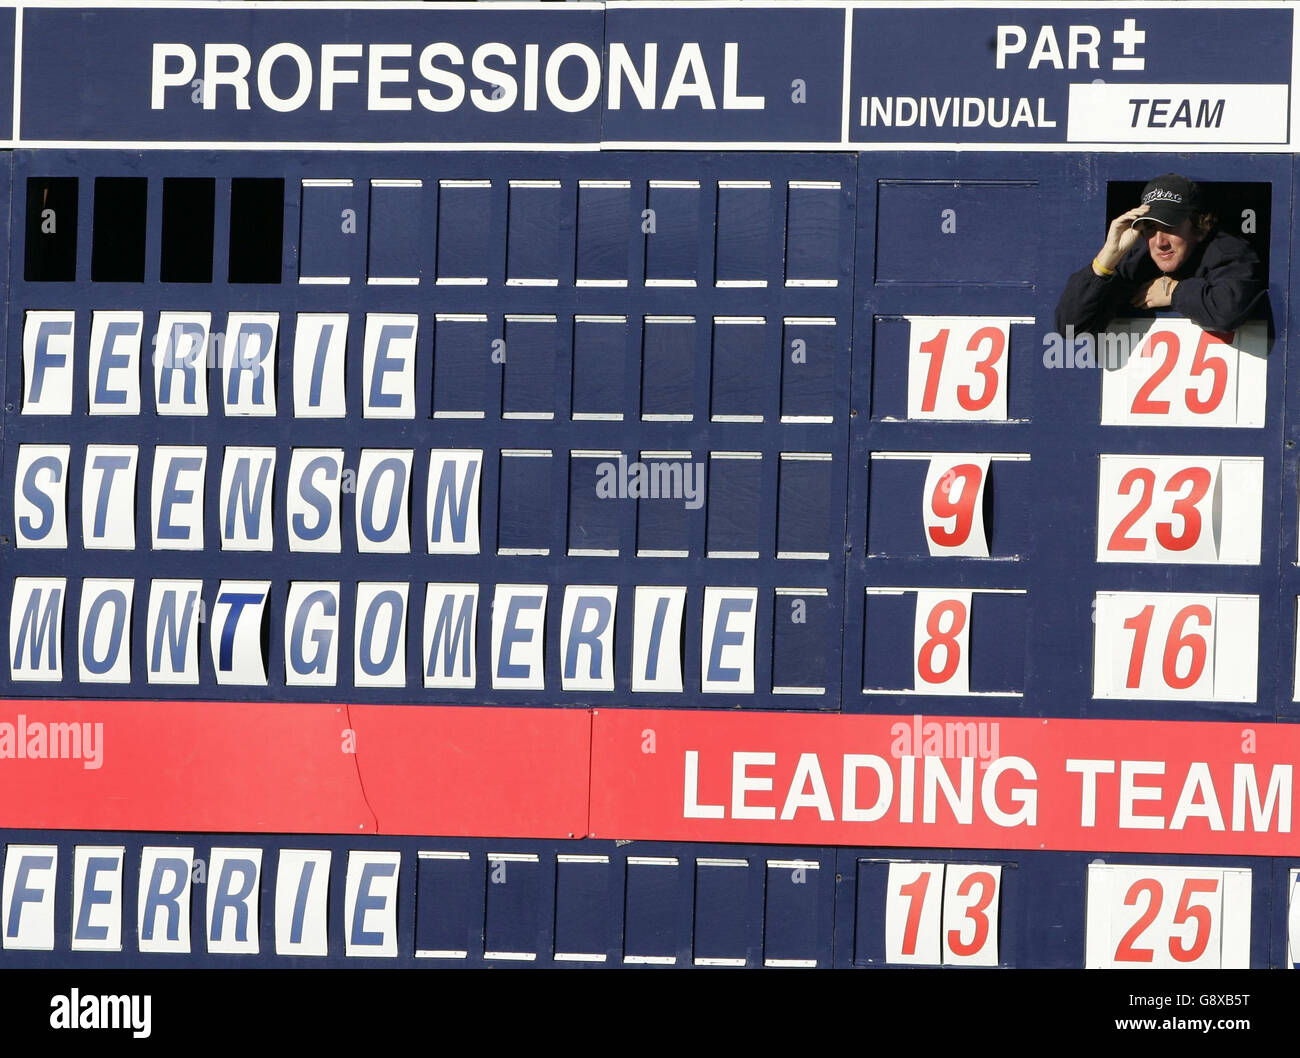 A scoreboard man keeps an eye on the golf with England's Kenneth Ferrie at the top of the leaderboard during the third round of the Dunhill Links Championships at Kingsbarns Golf Course, Fife, Scotland, Saturday October 1, 2005. PRESS ASSOCIATION Photo. Photo credit should read: Andrew Milligan/PA. Stock Photo